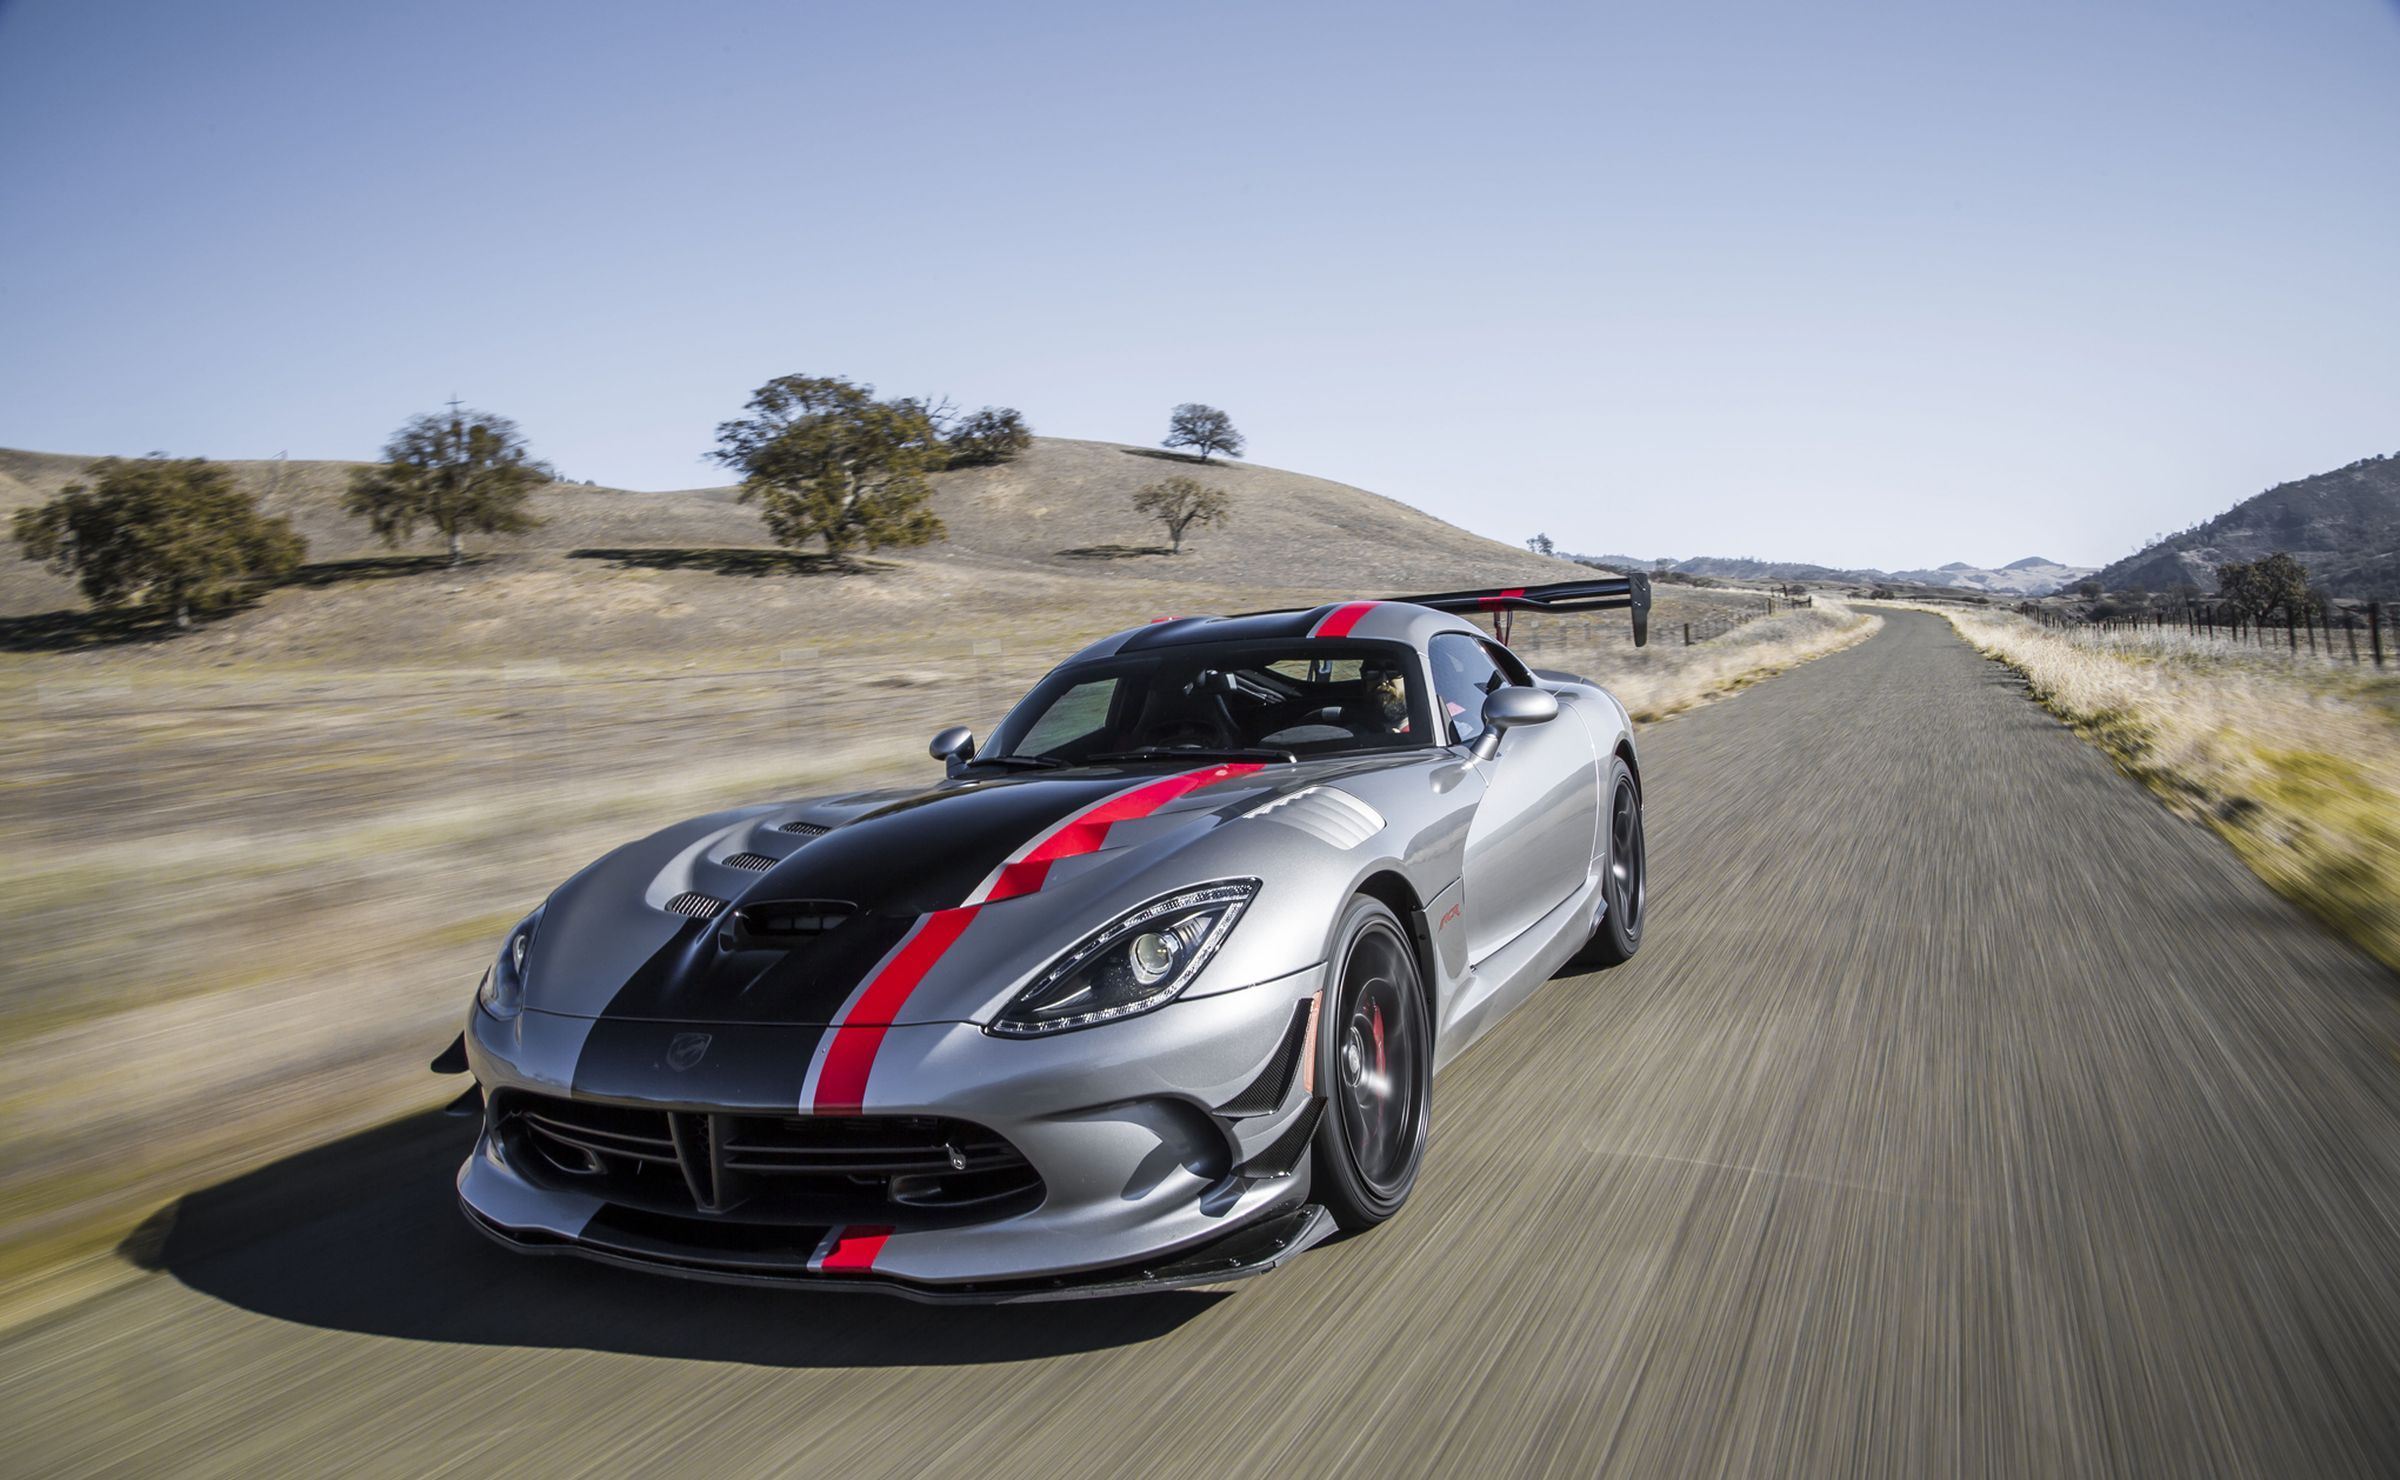 Free download Dodge Viper ACR Wallpapers and Backgrounds Image stmednet 240...